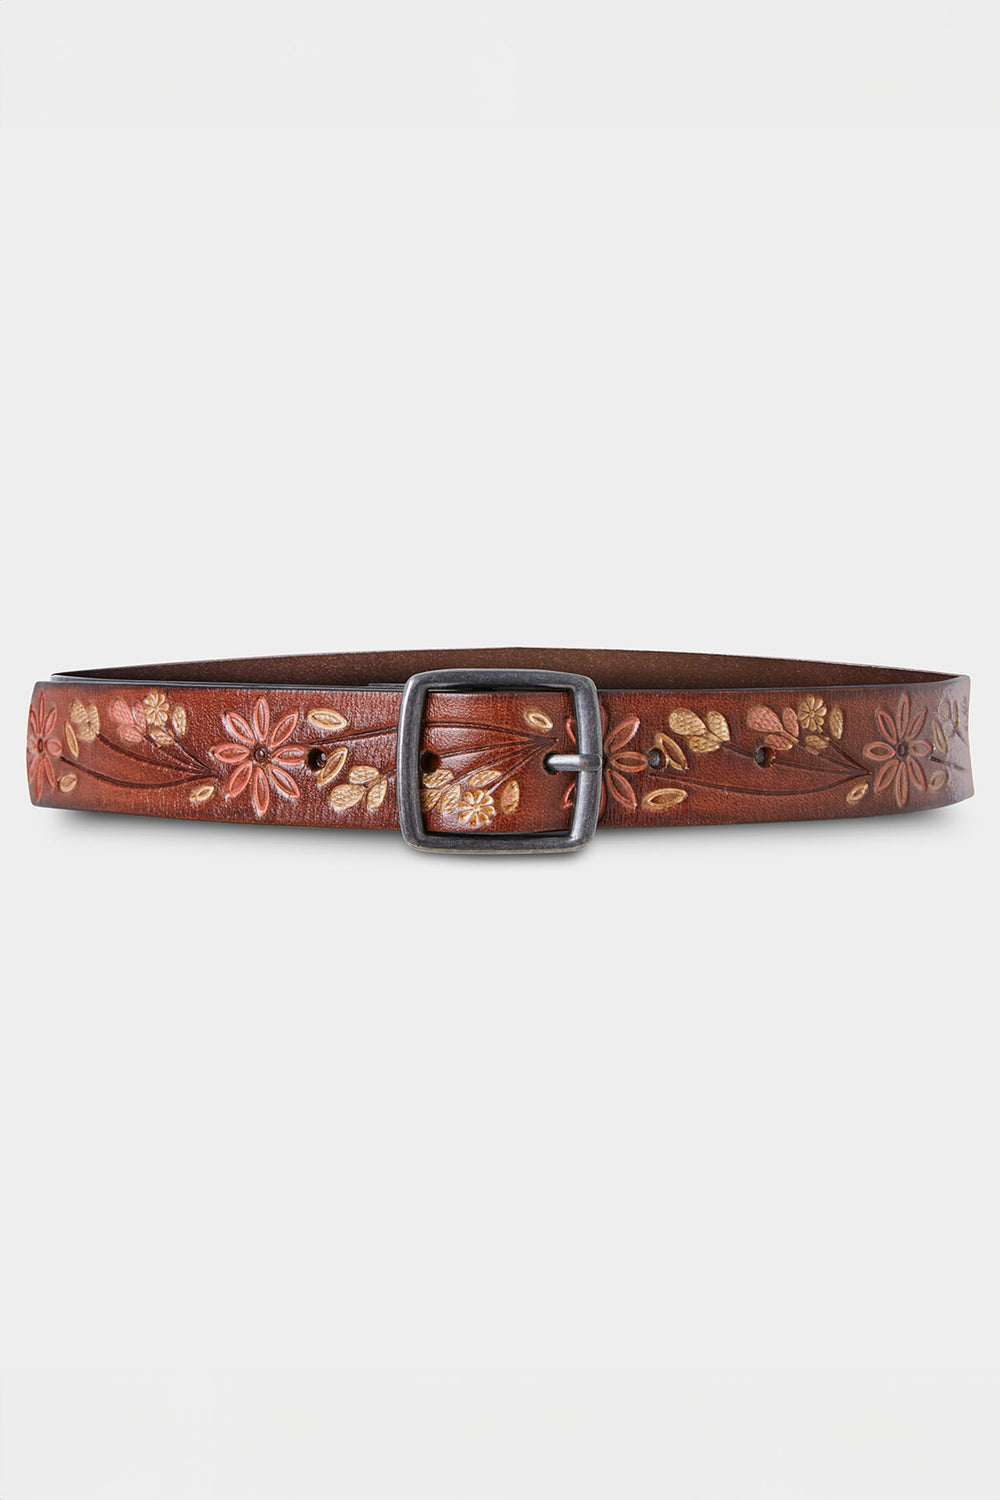 Joe Browns HB407A California Brown Tooled Leather Belt - Experience Boutique